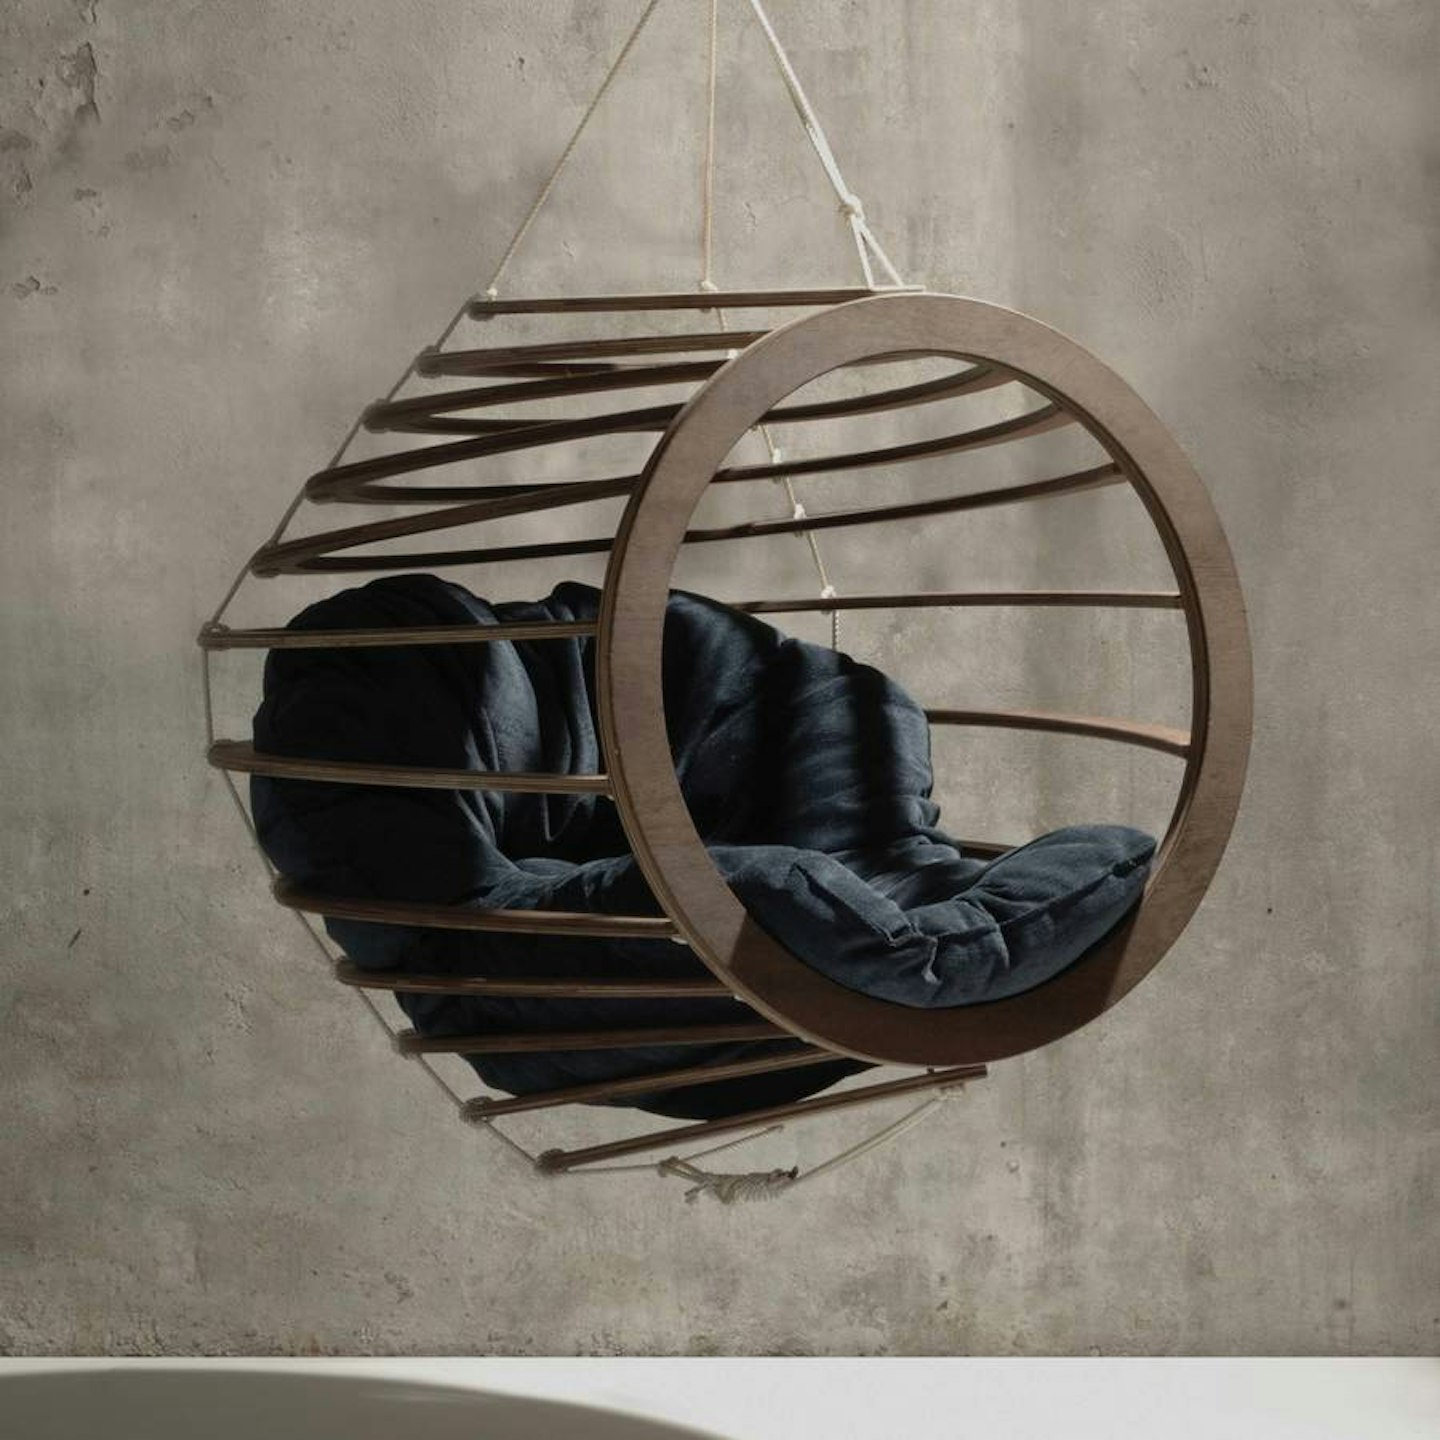 Hive Hanging Chair